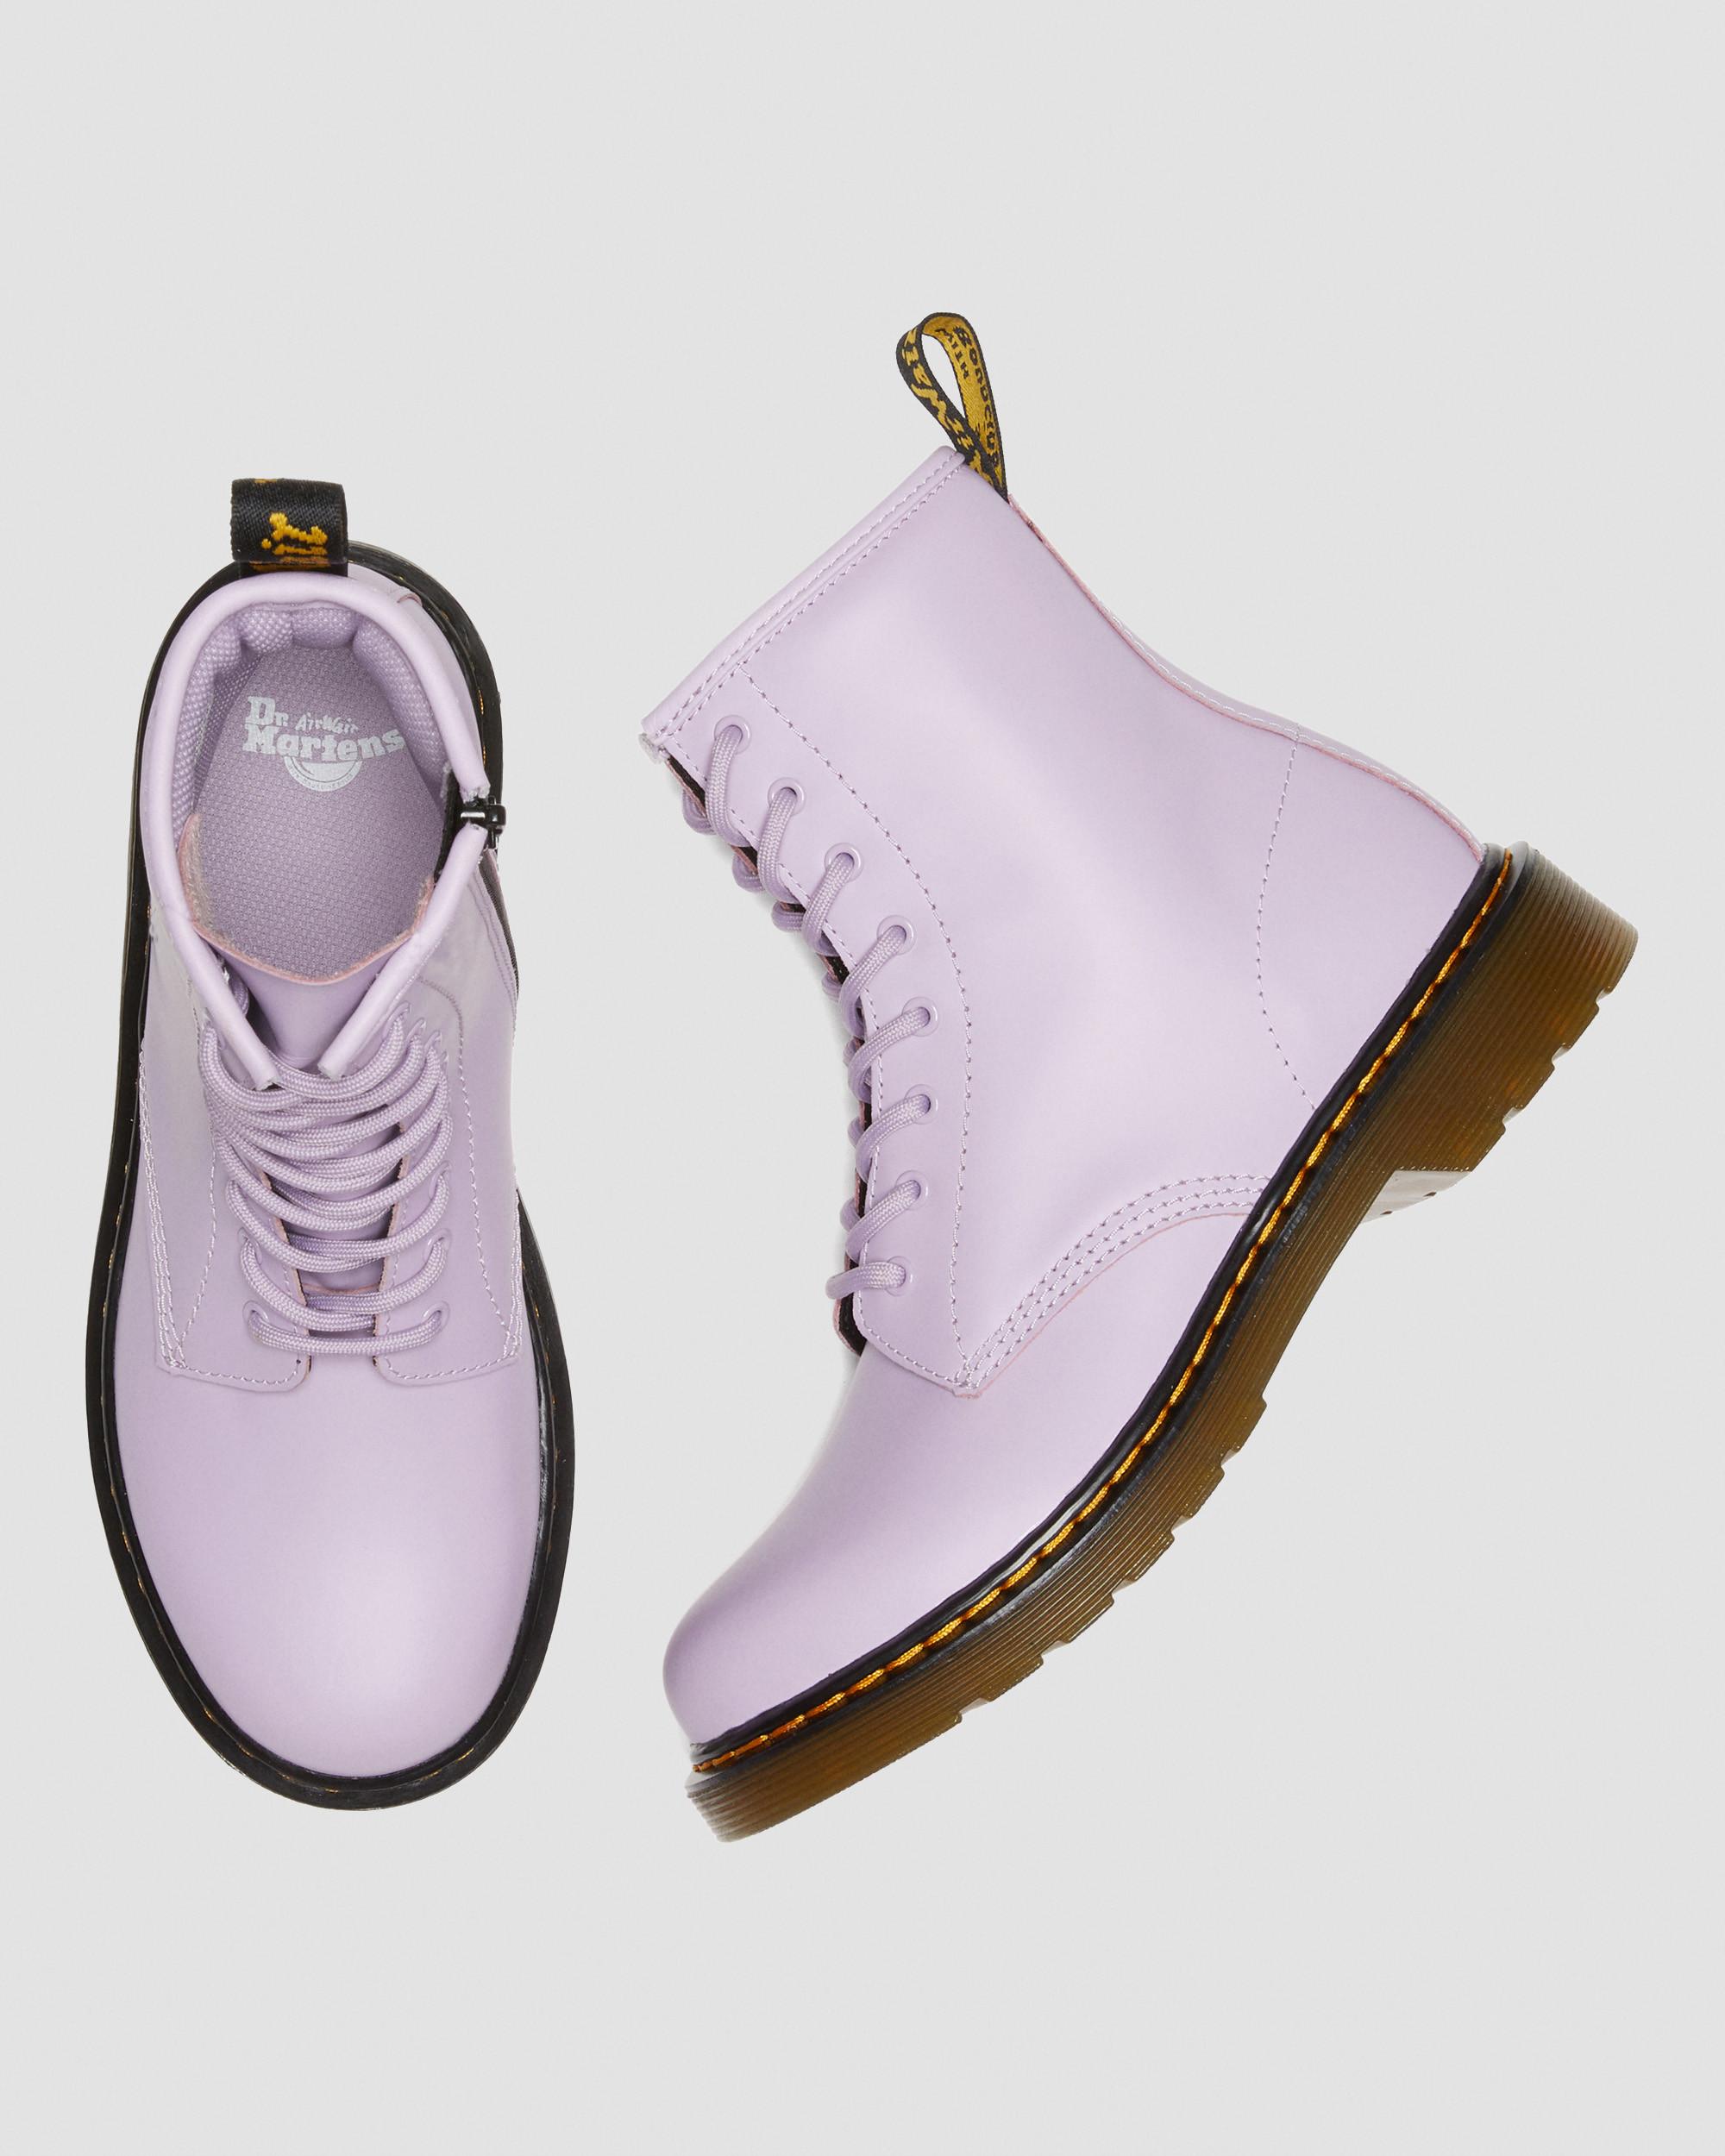 Romario Dr. Youth 1460 in Boots Lace Leather Up Martens | Lilac